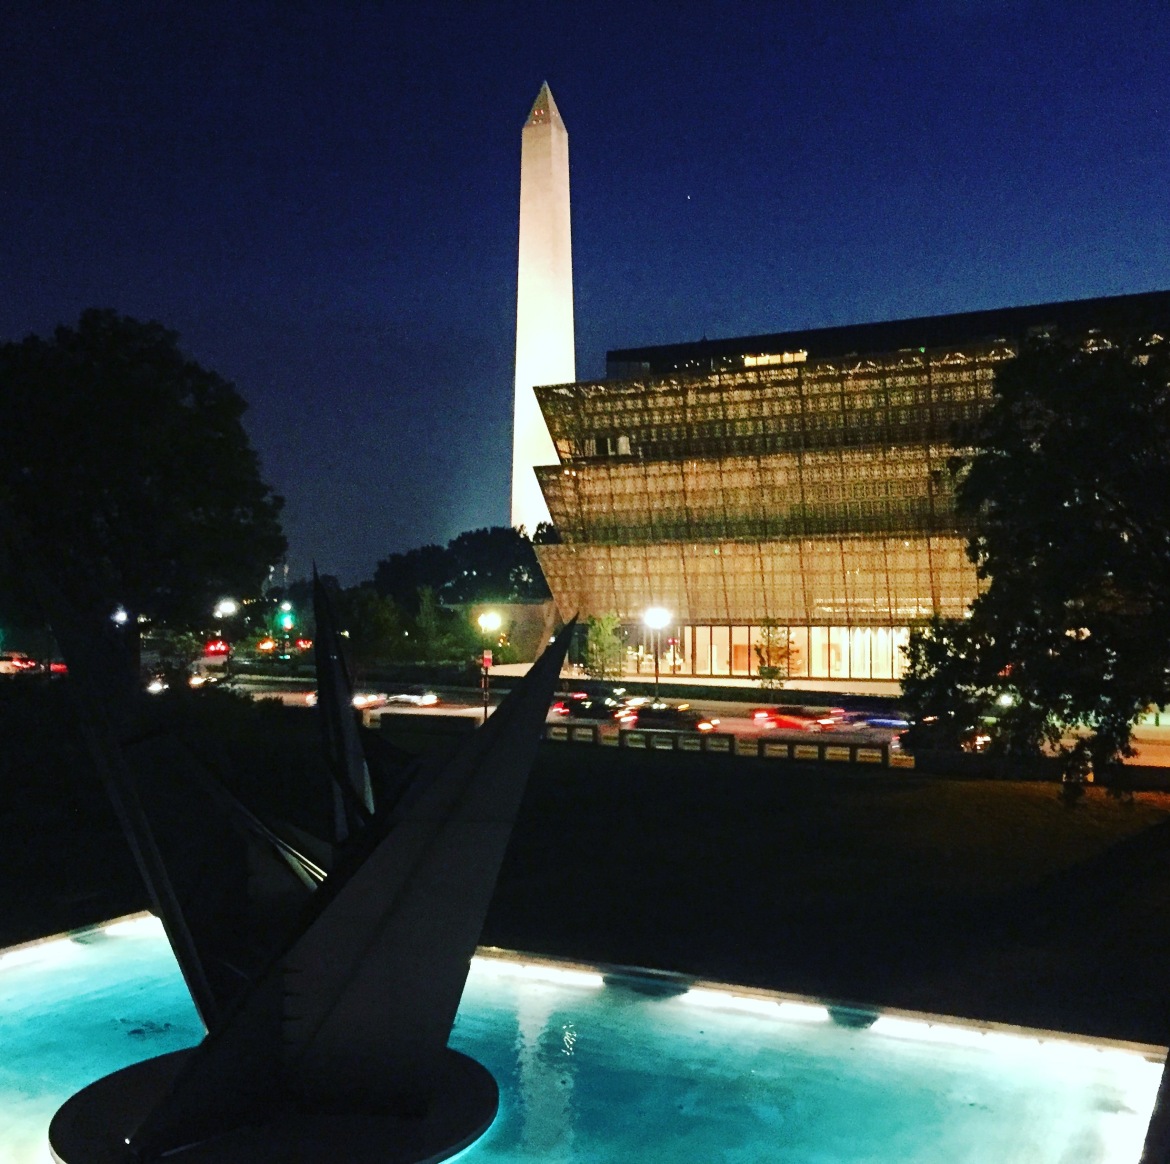 D.C. Summer Nights – Food in the Garden | Together we cook